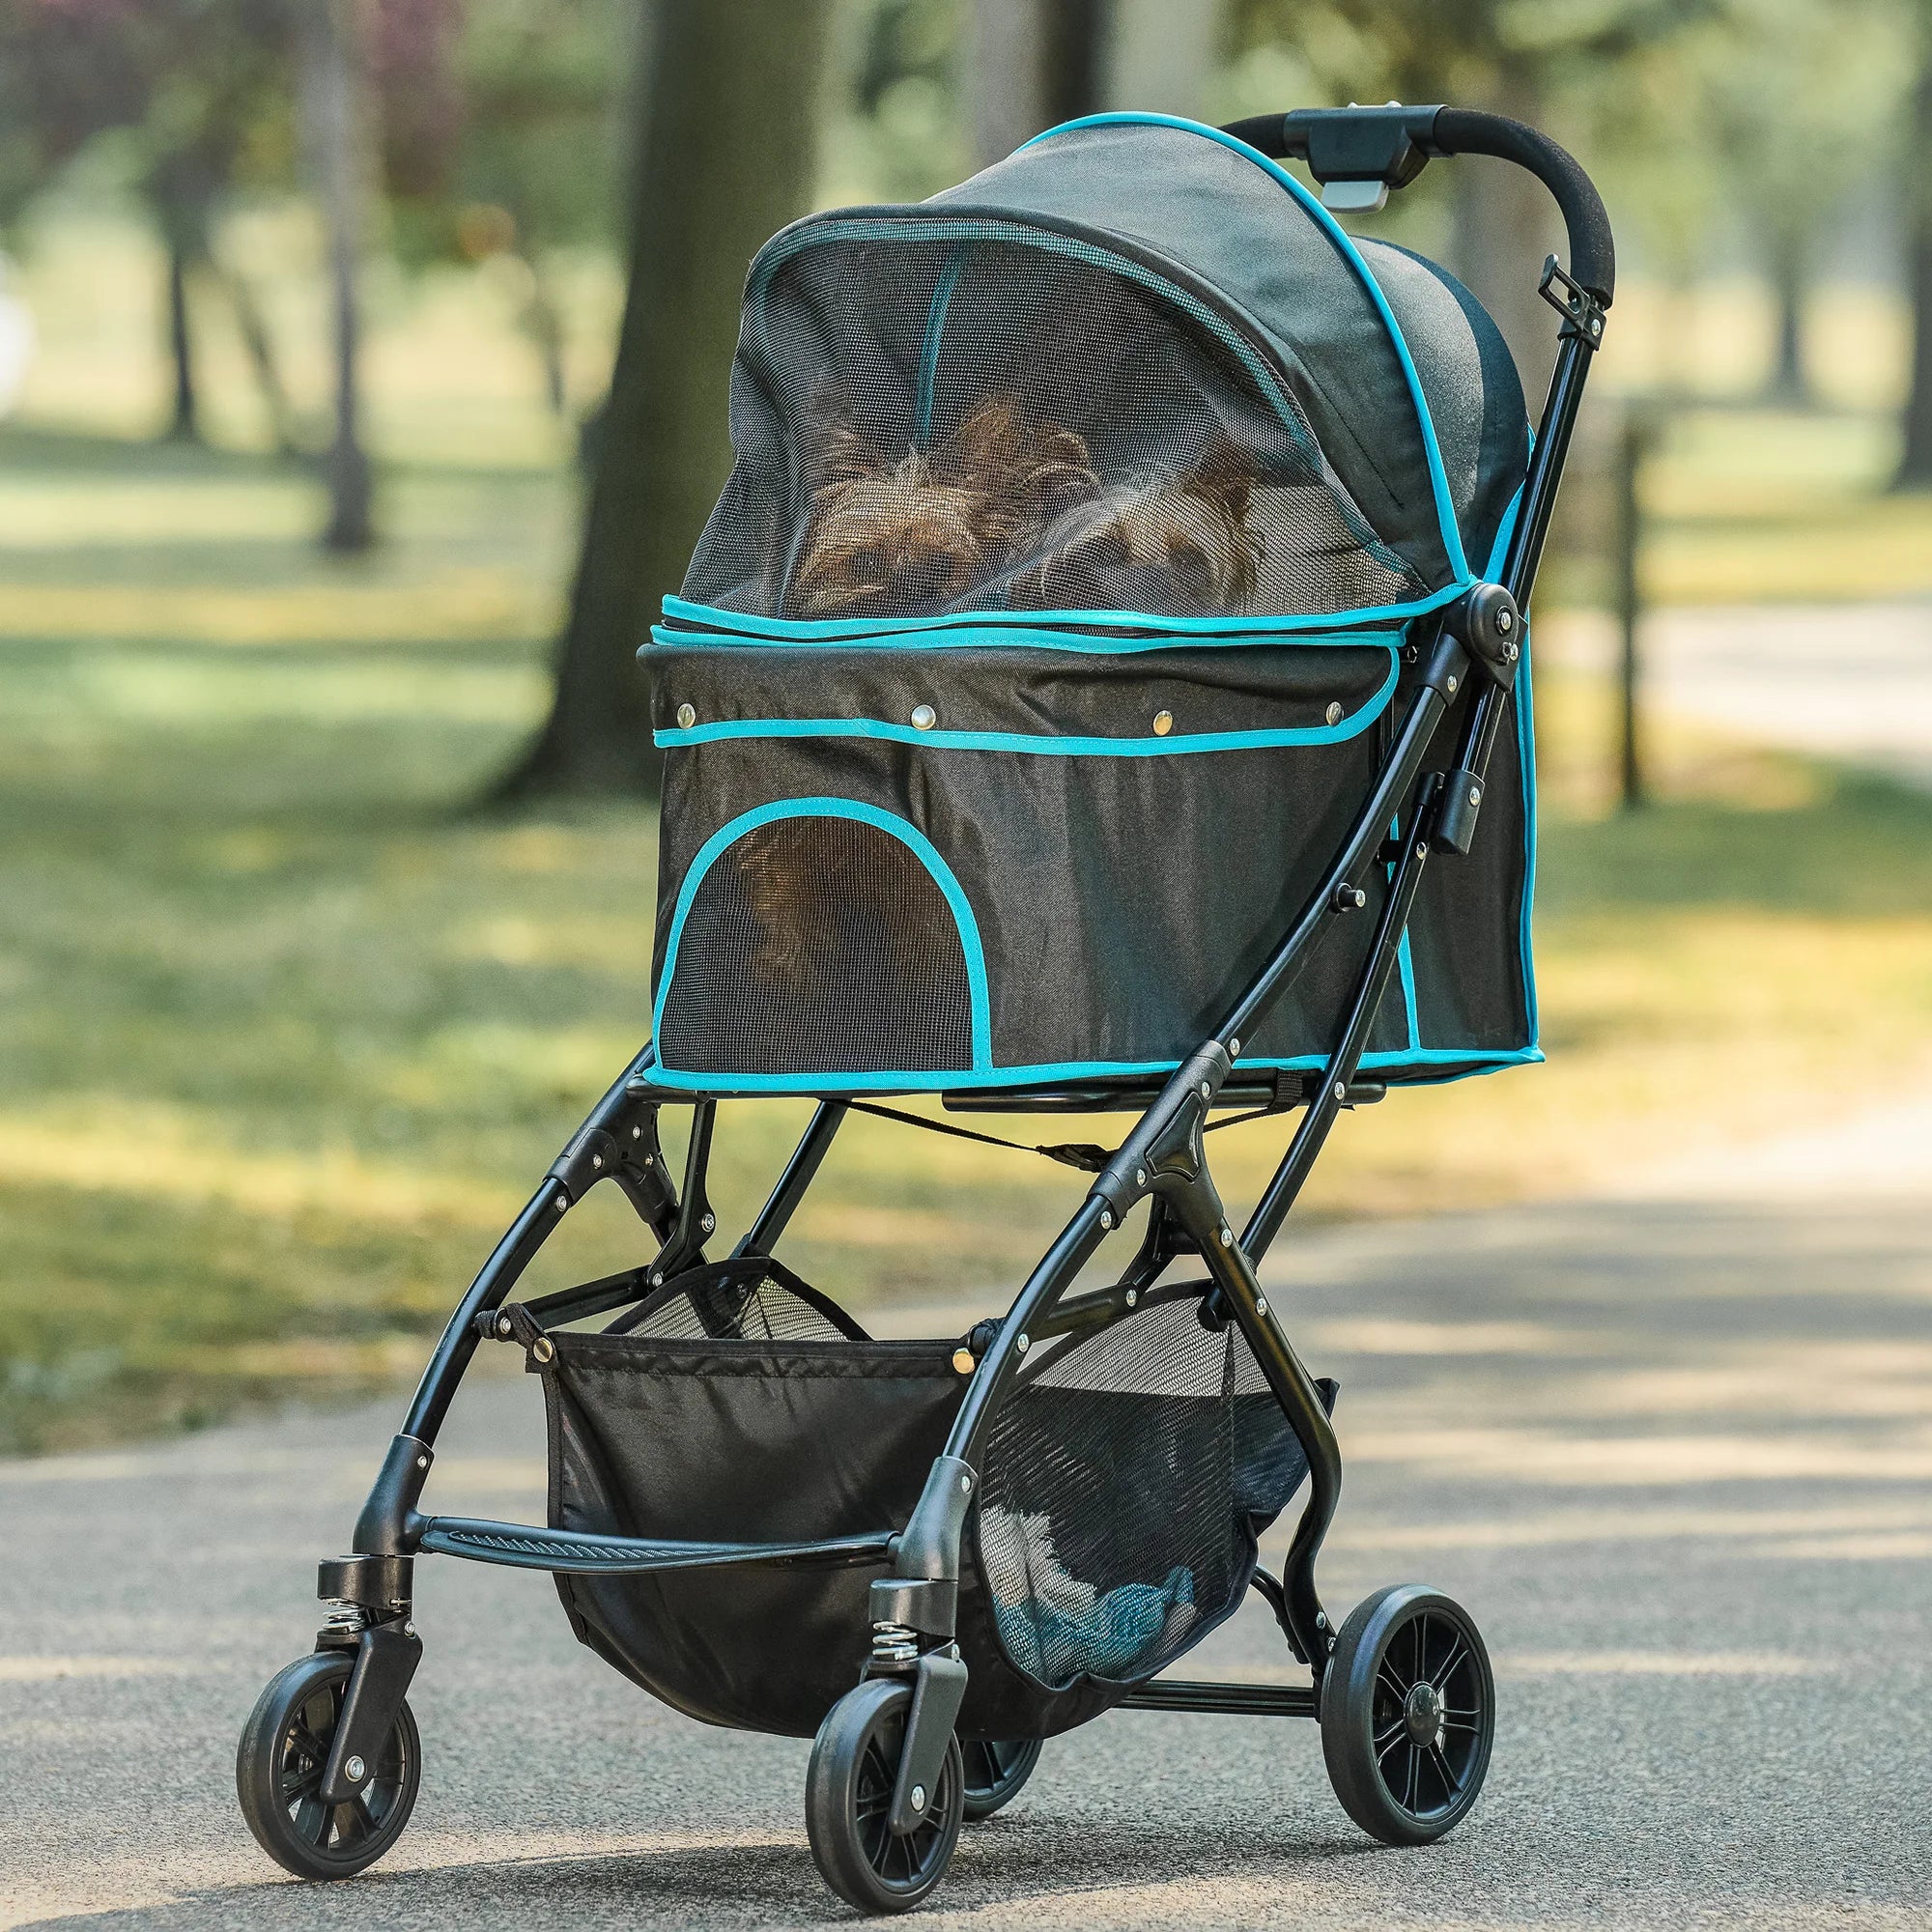 Two dogs sitting in the Easy Fold & Go Pet Stroller while at a park.